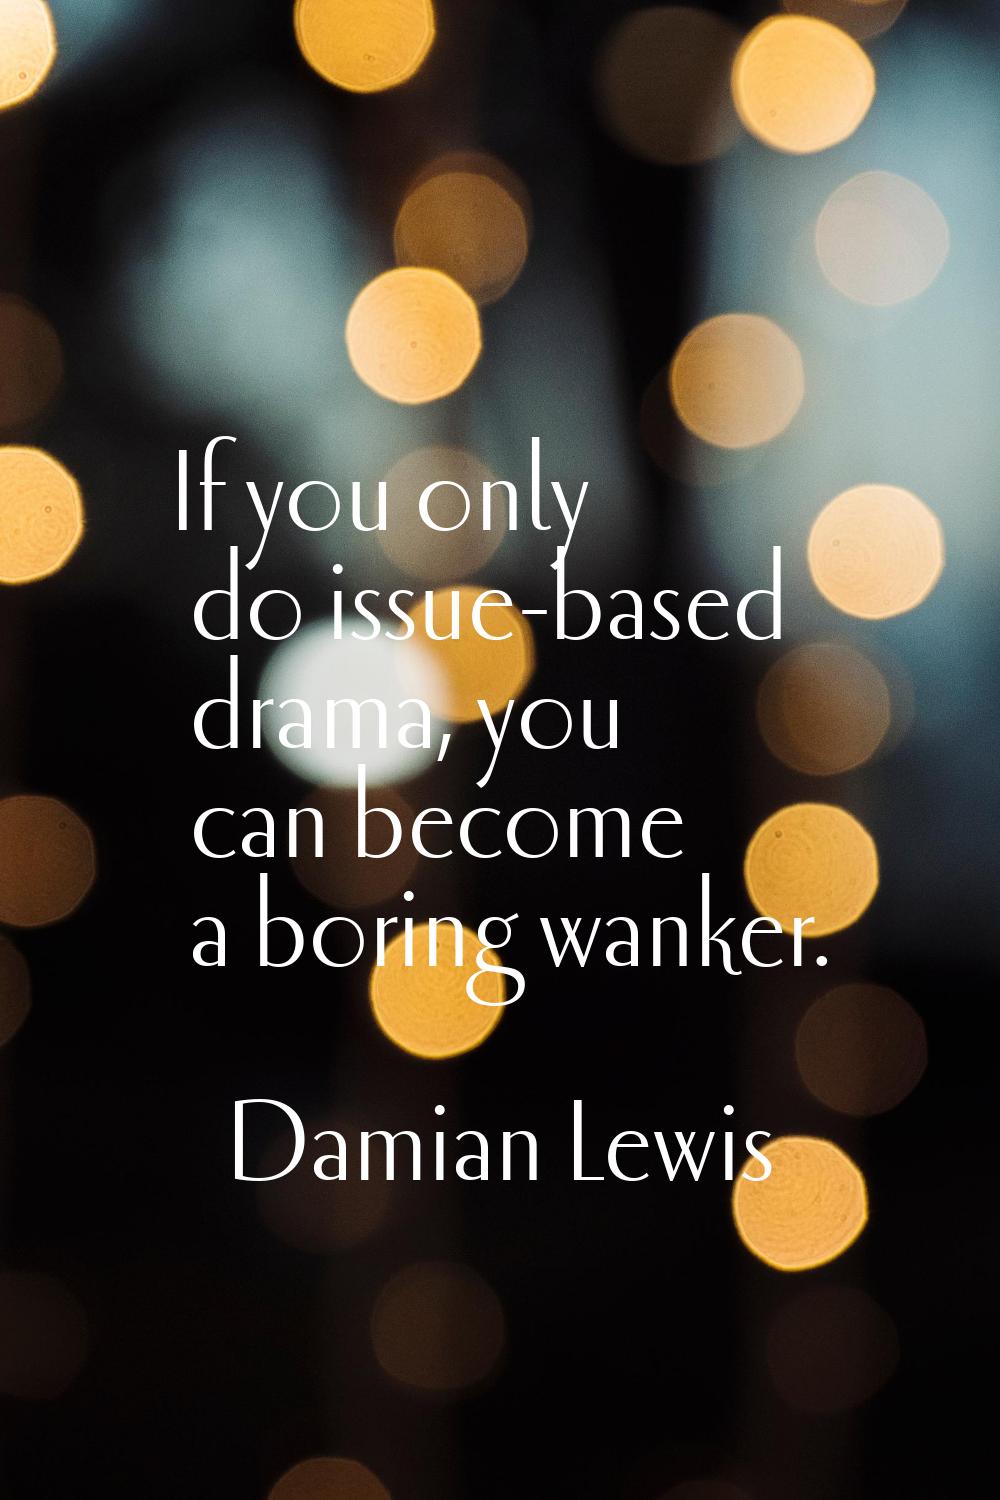 If you only do issue-based drama, you can become a boring wanker.